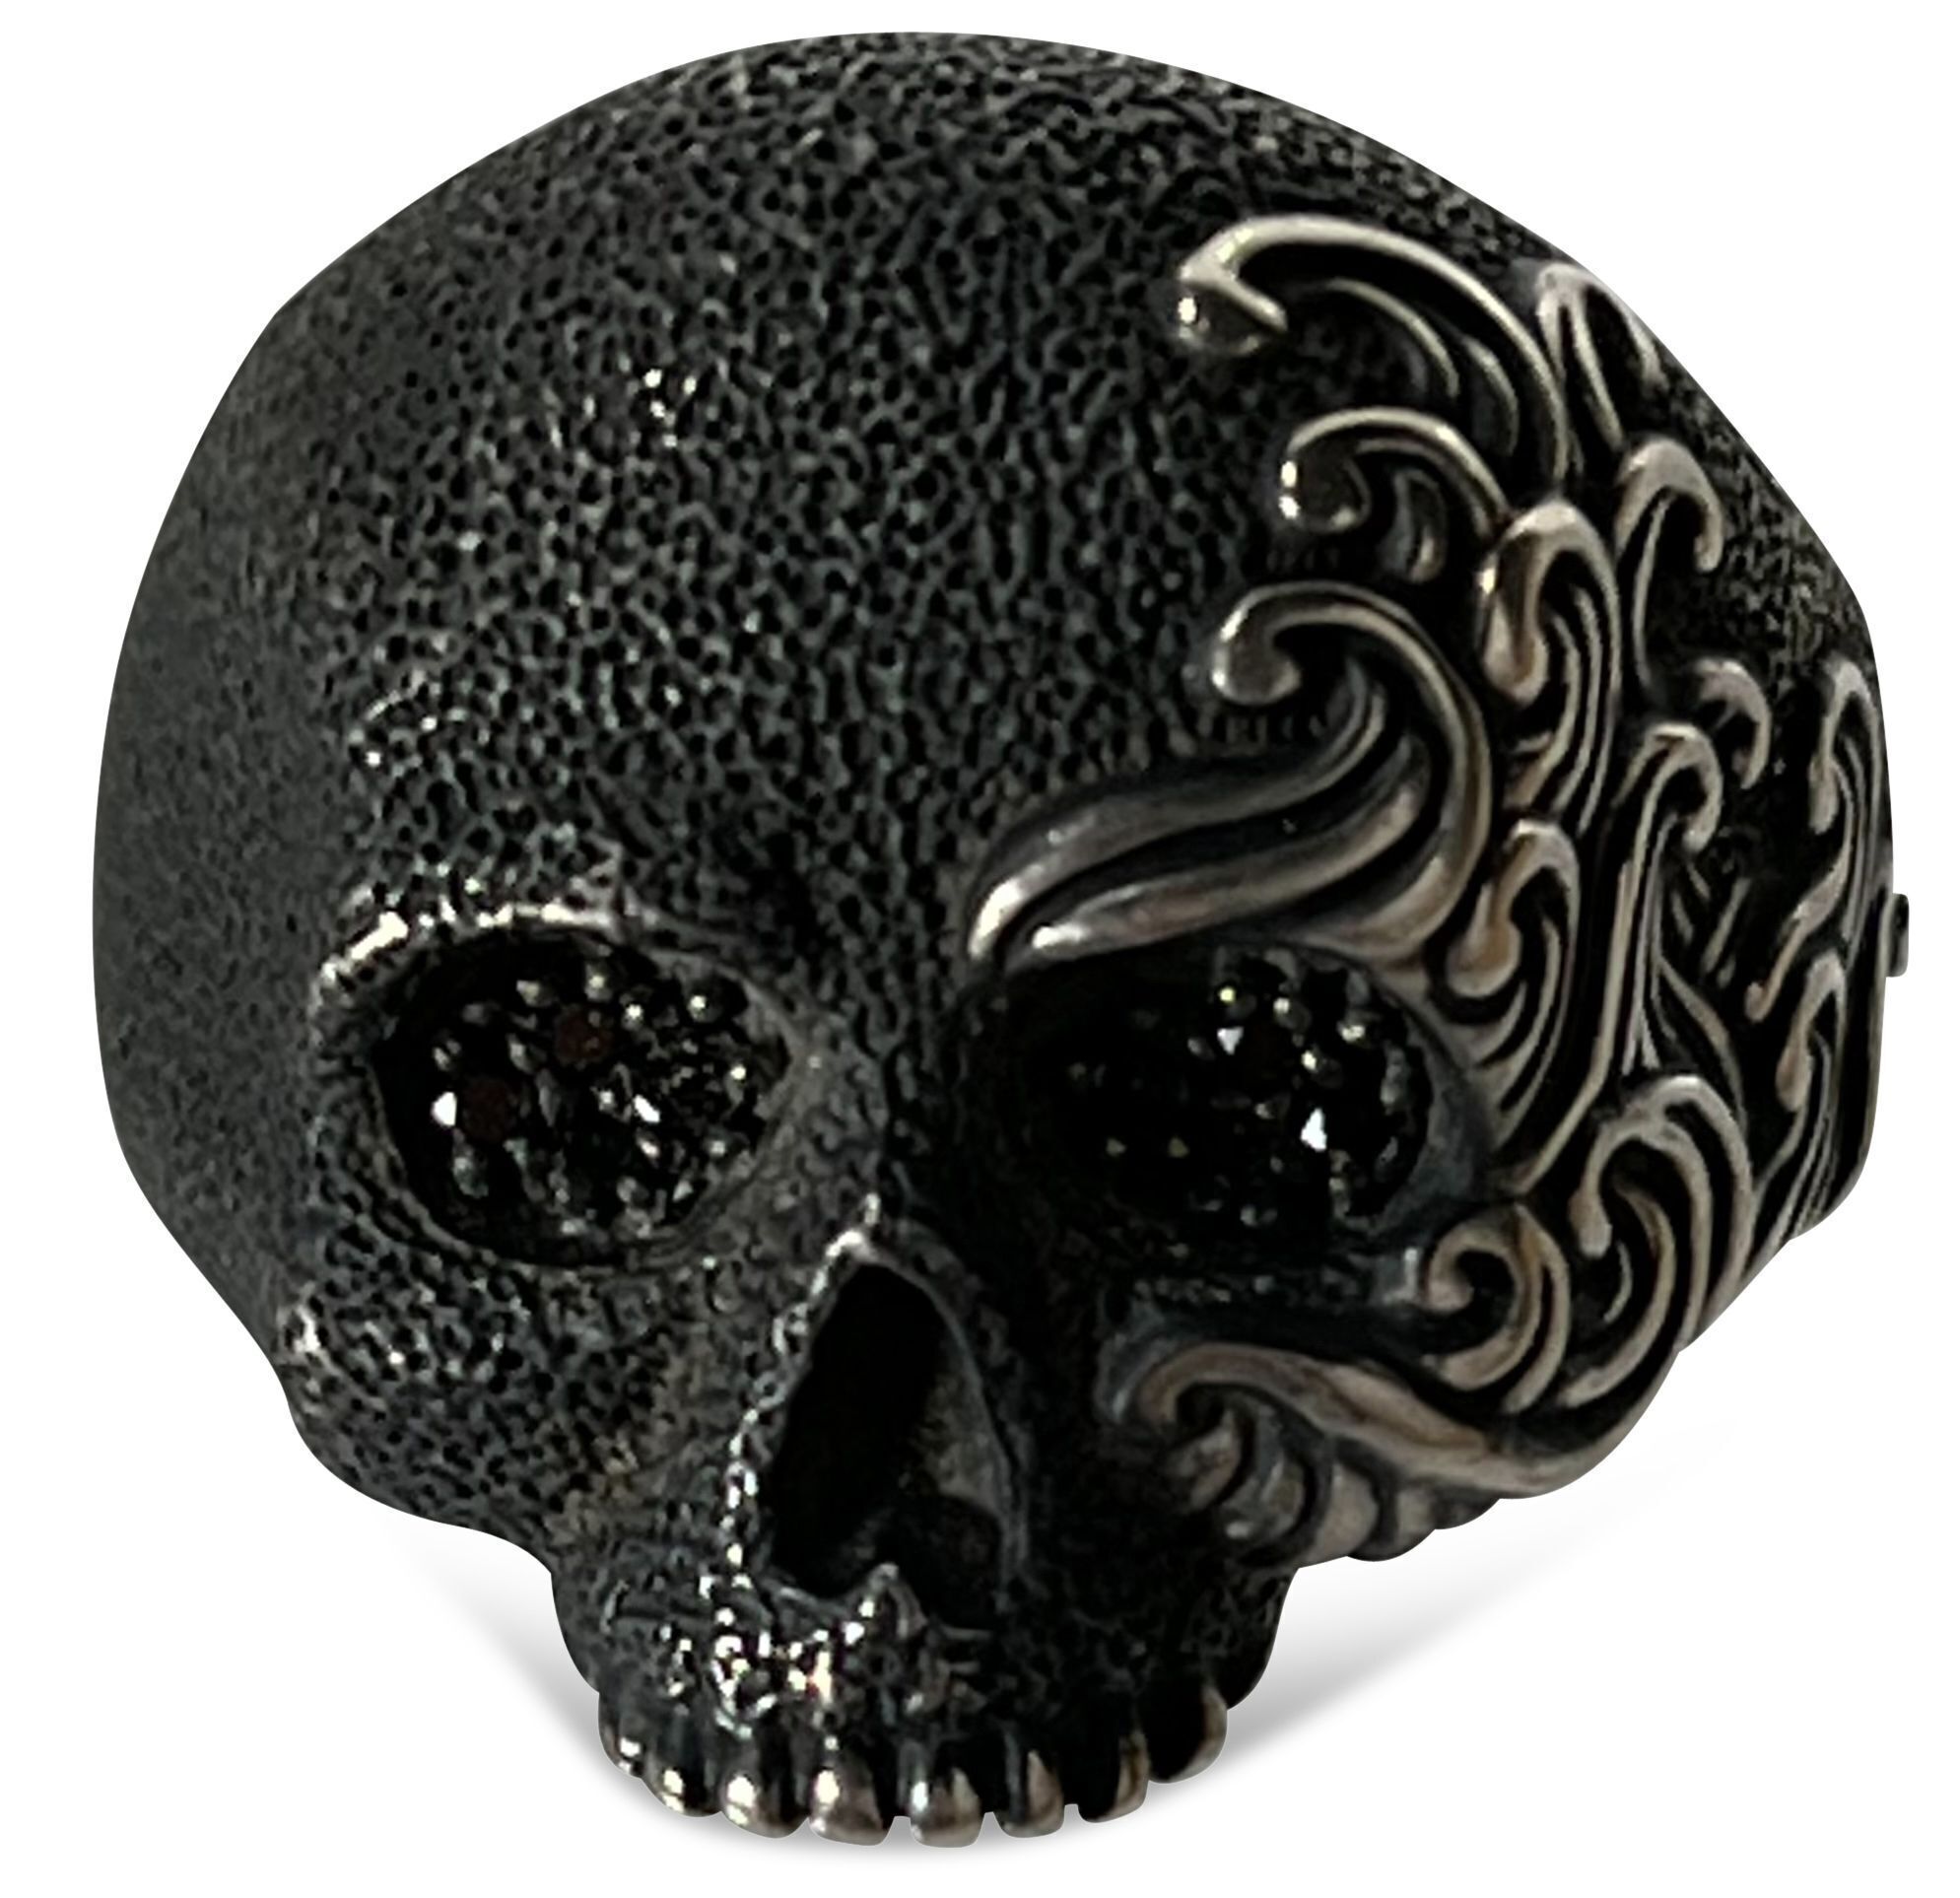 David Yurman Waves Skull Ring with Pave Black Diamonds in Sterling Silver - 3